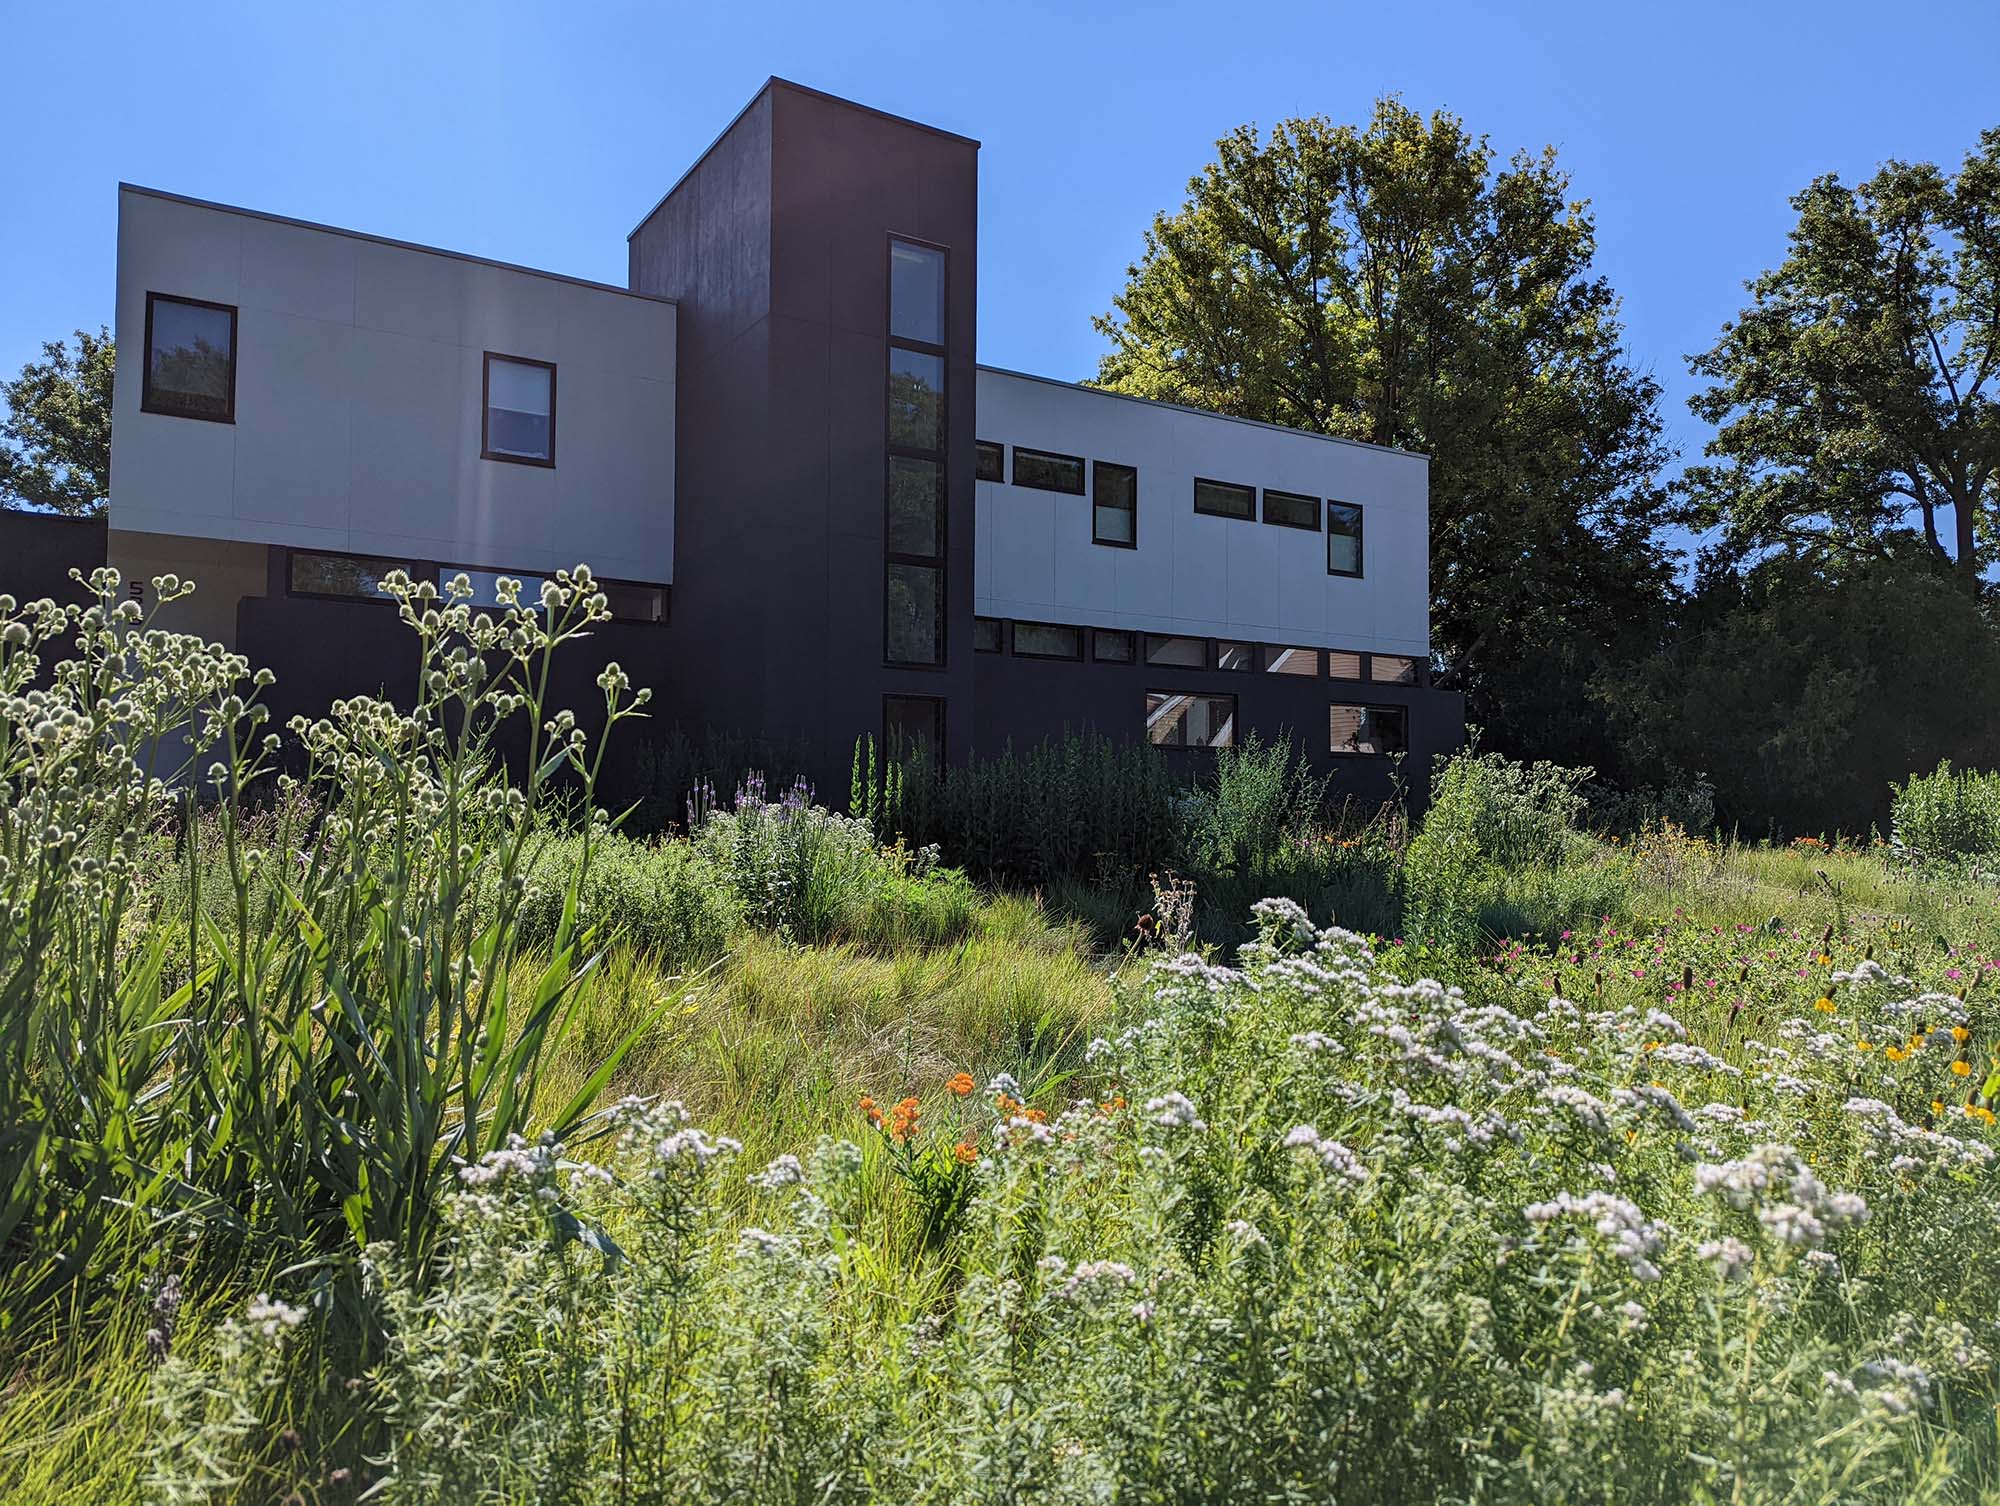 A modern-style building on a sunny day, with a native plant meadow in front